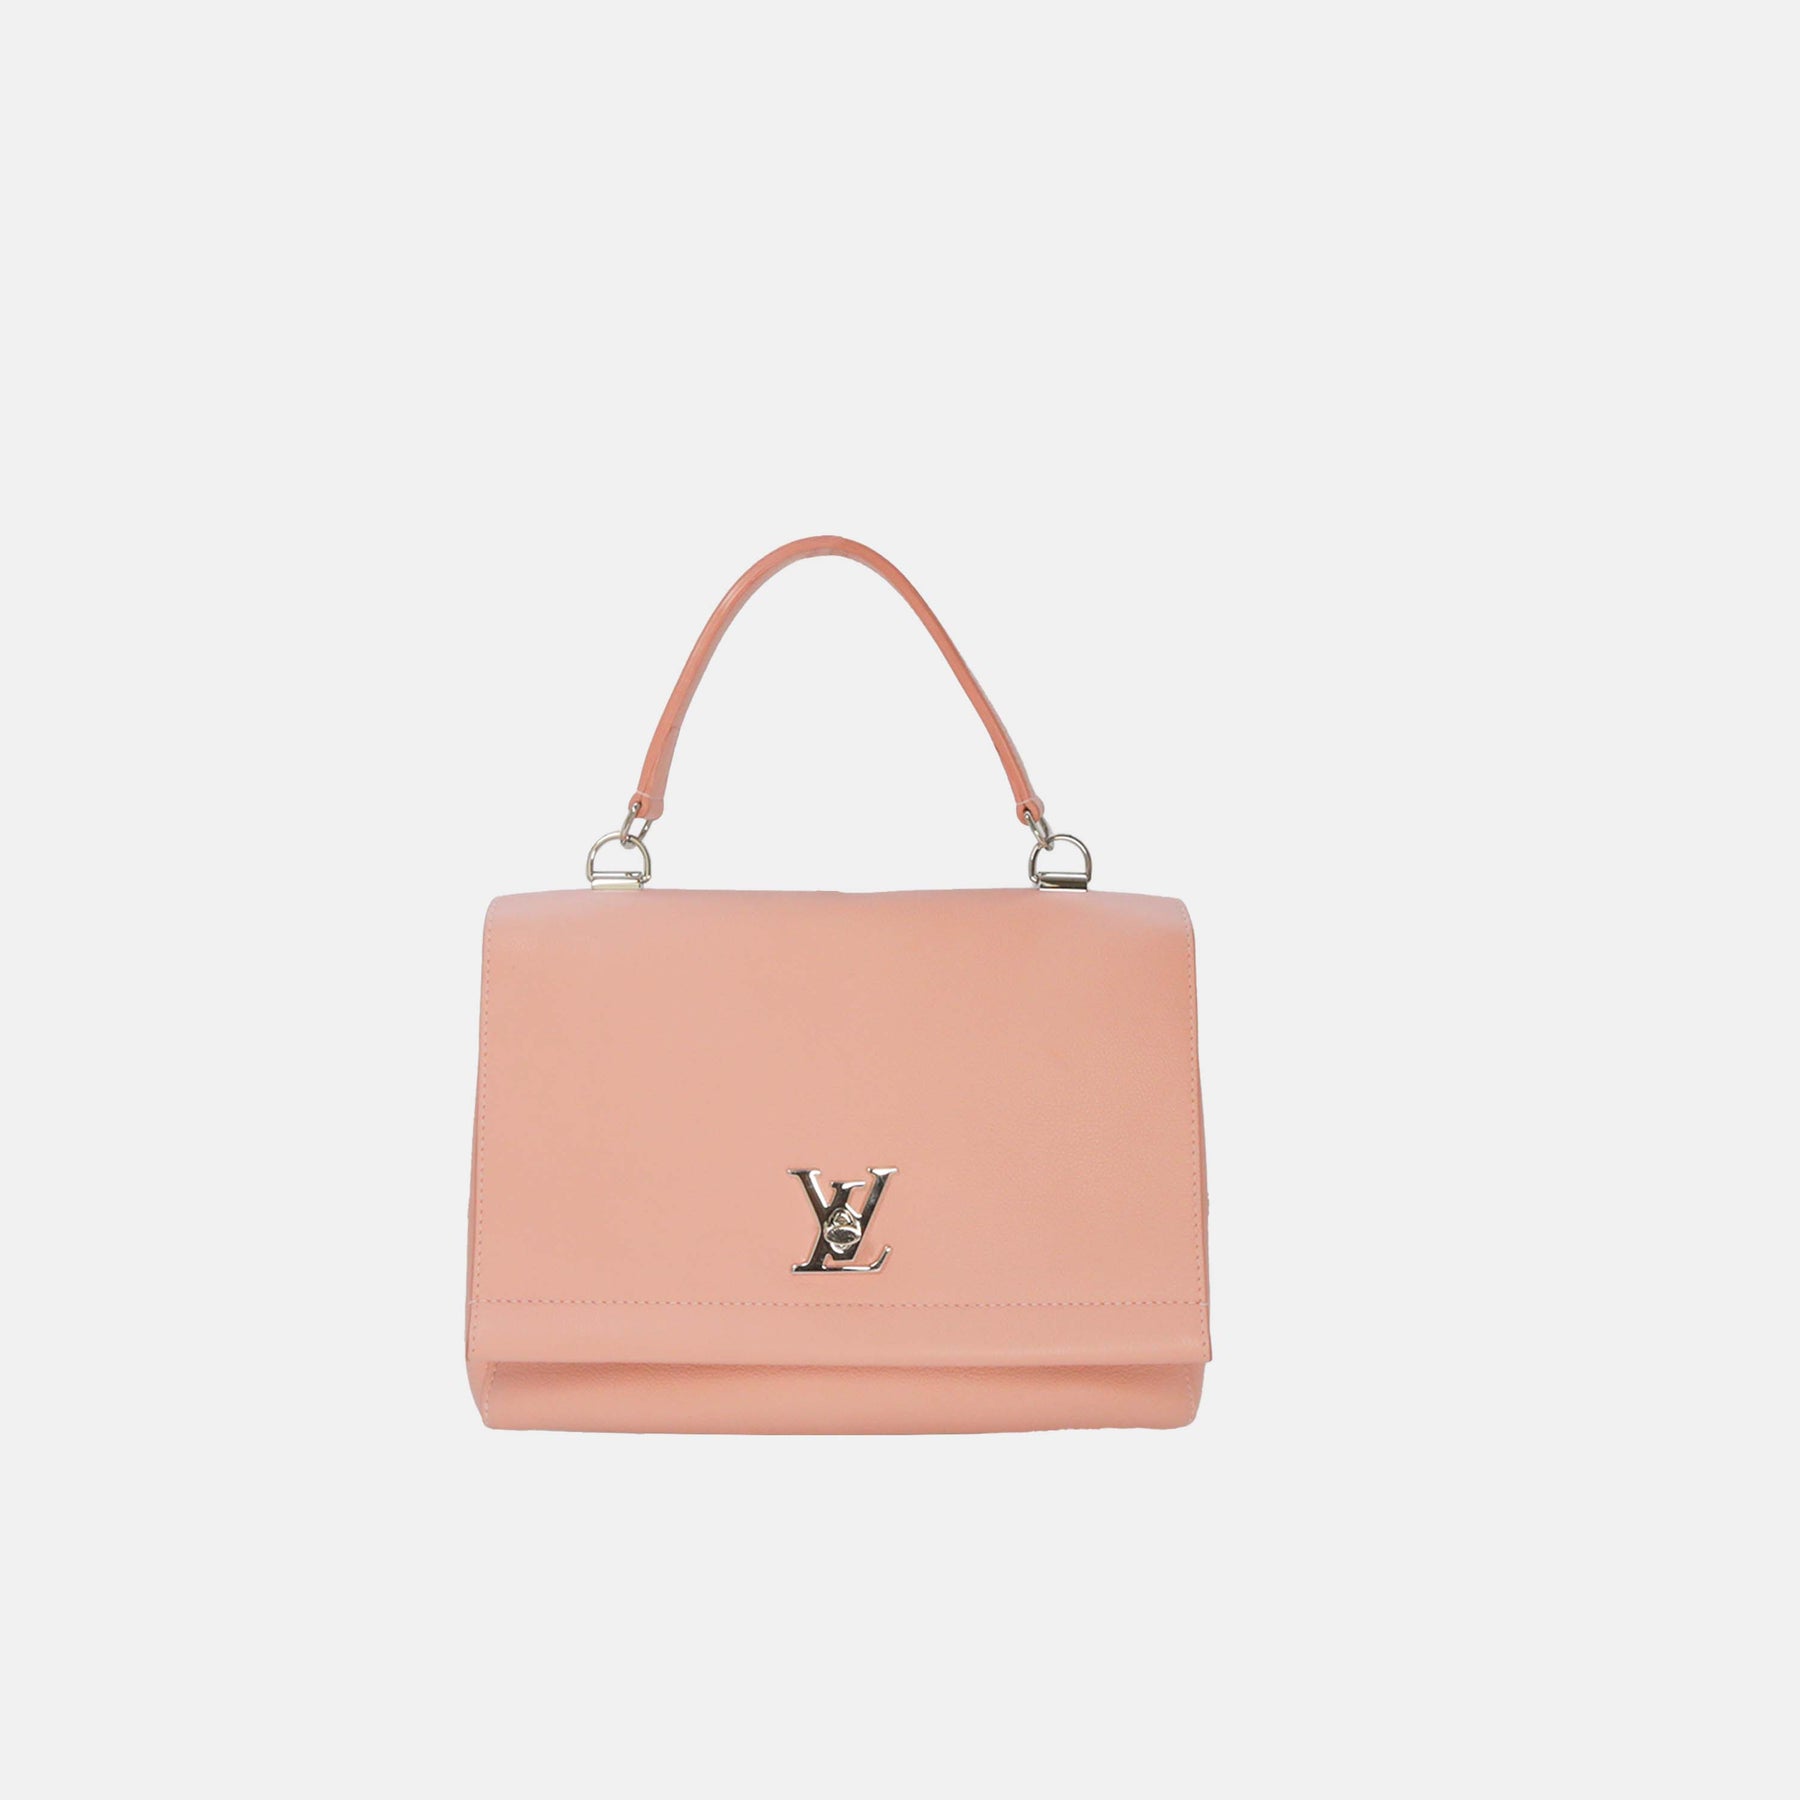 Louis Vuitton-Louis Vuitton Lockme The LV Leather Lockme Backpack is a  stylish and functional